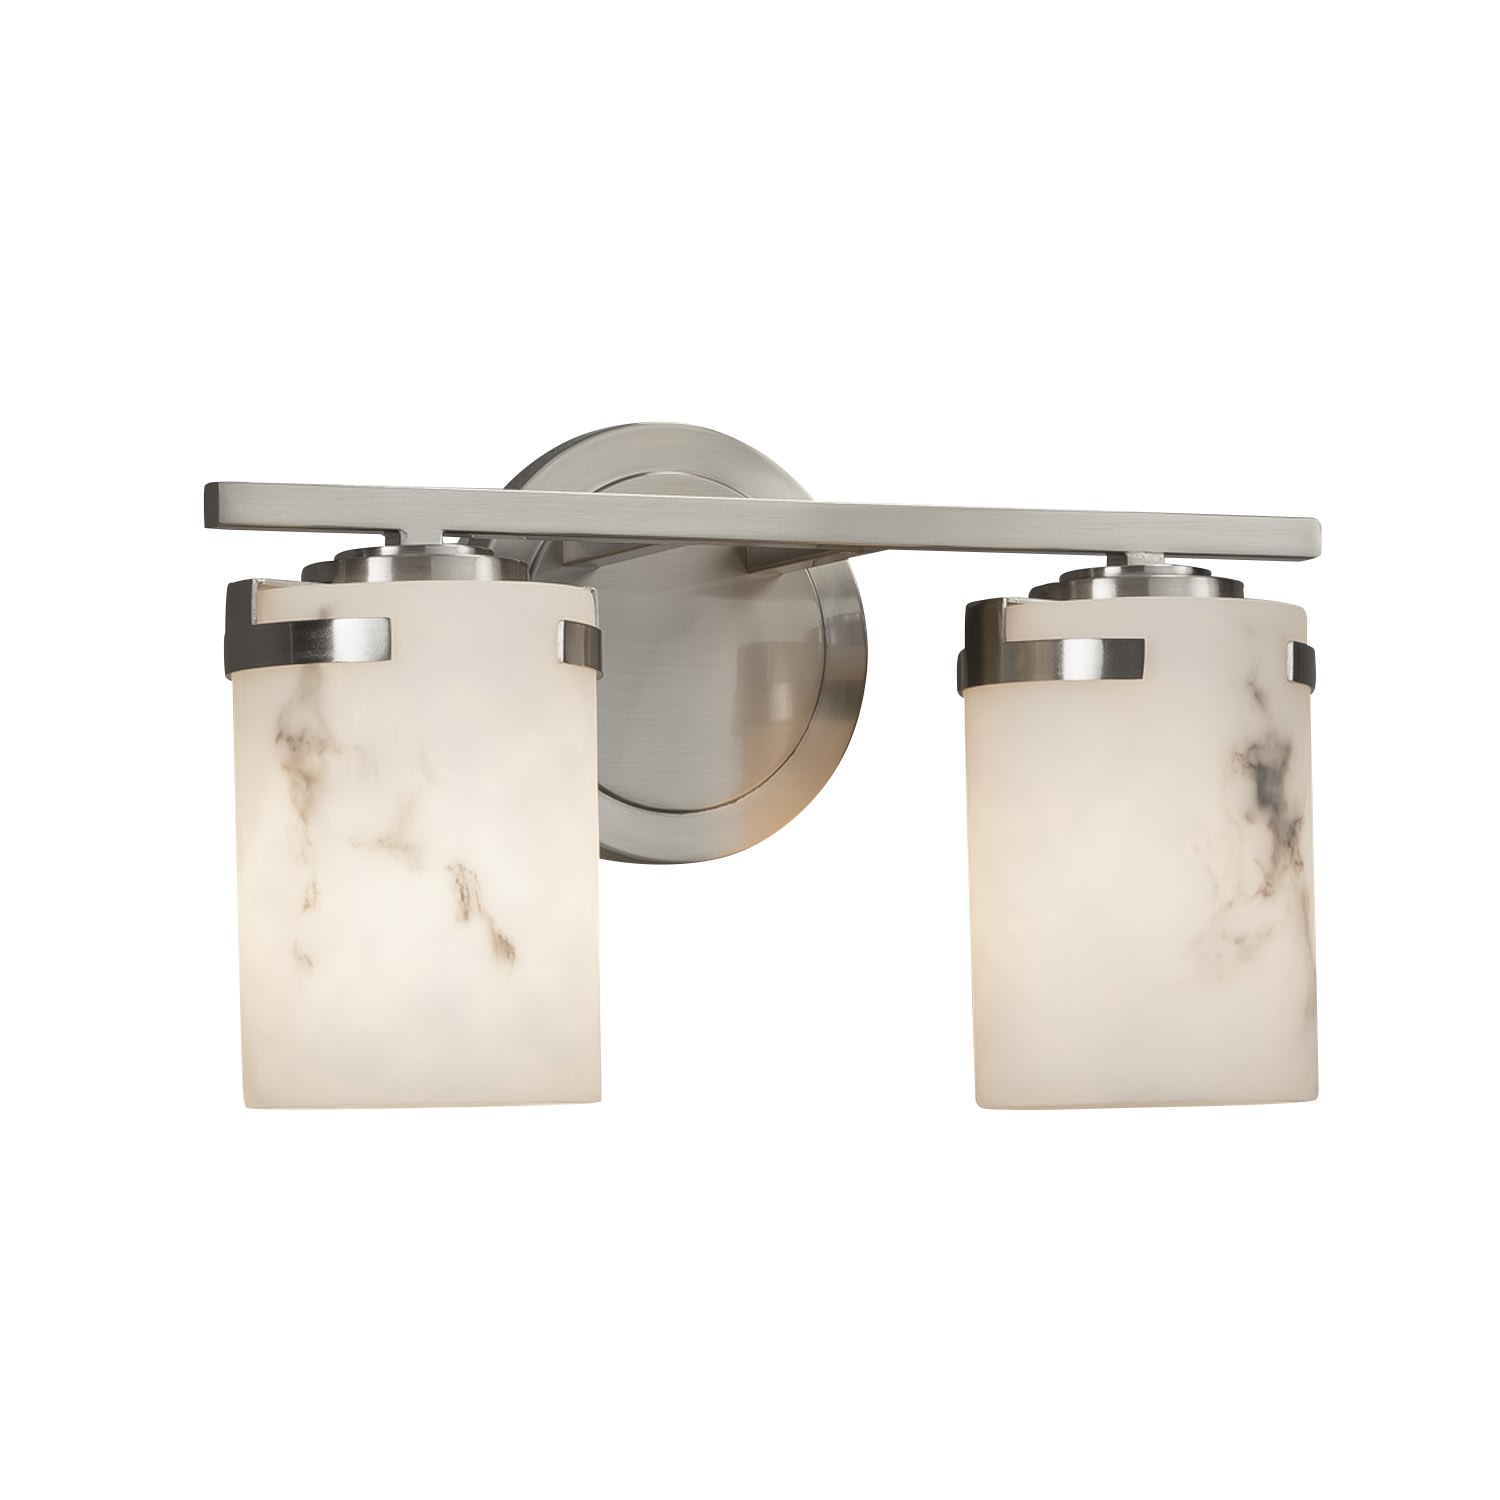 Justice Design Group LumenAria 2-Light Semi-Flush Incandescent Brushed Nickel Finish with Faux Alabaster Resin Shade 